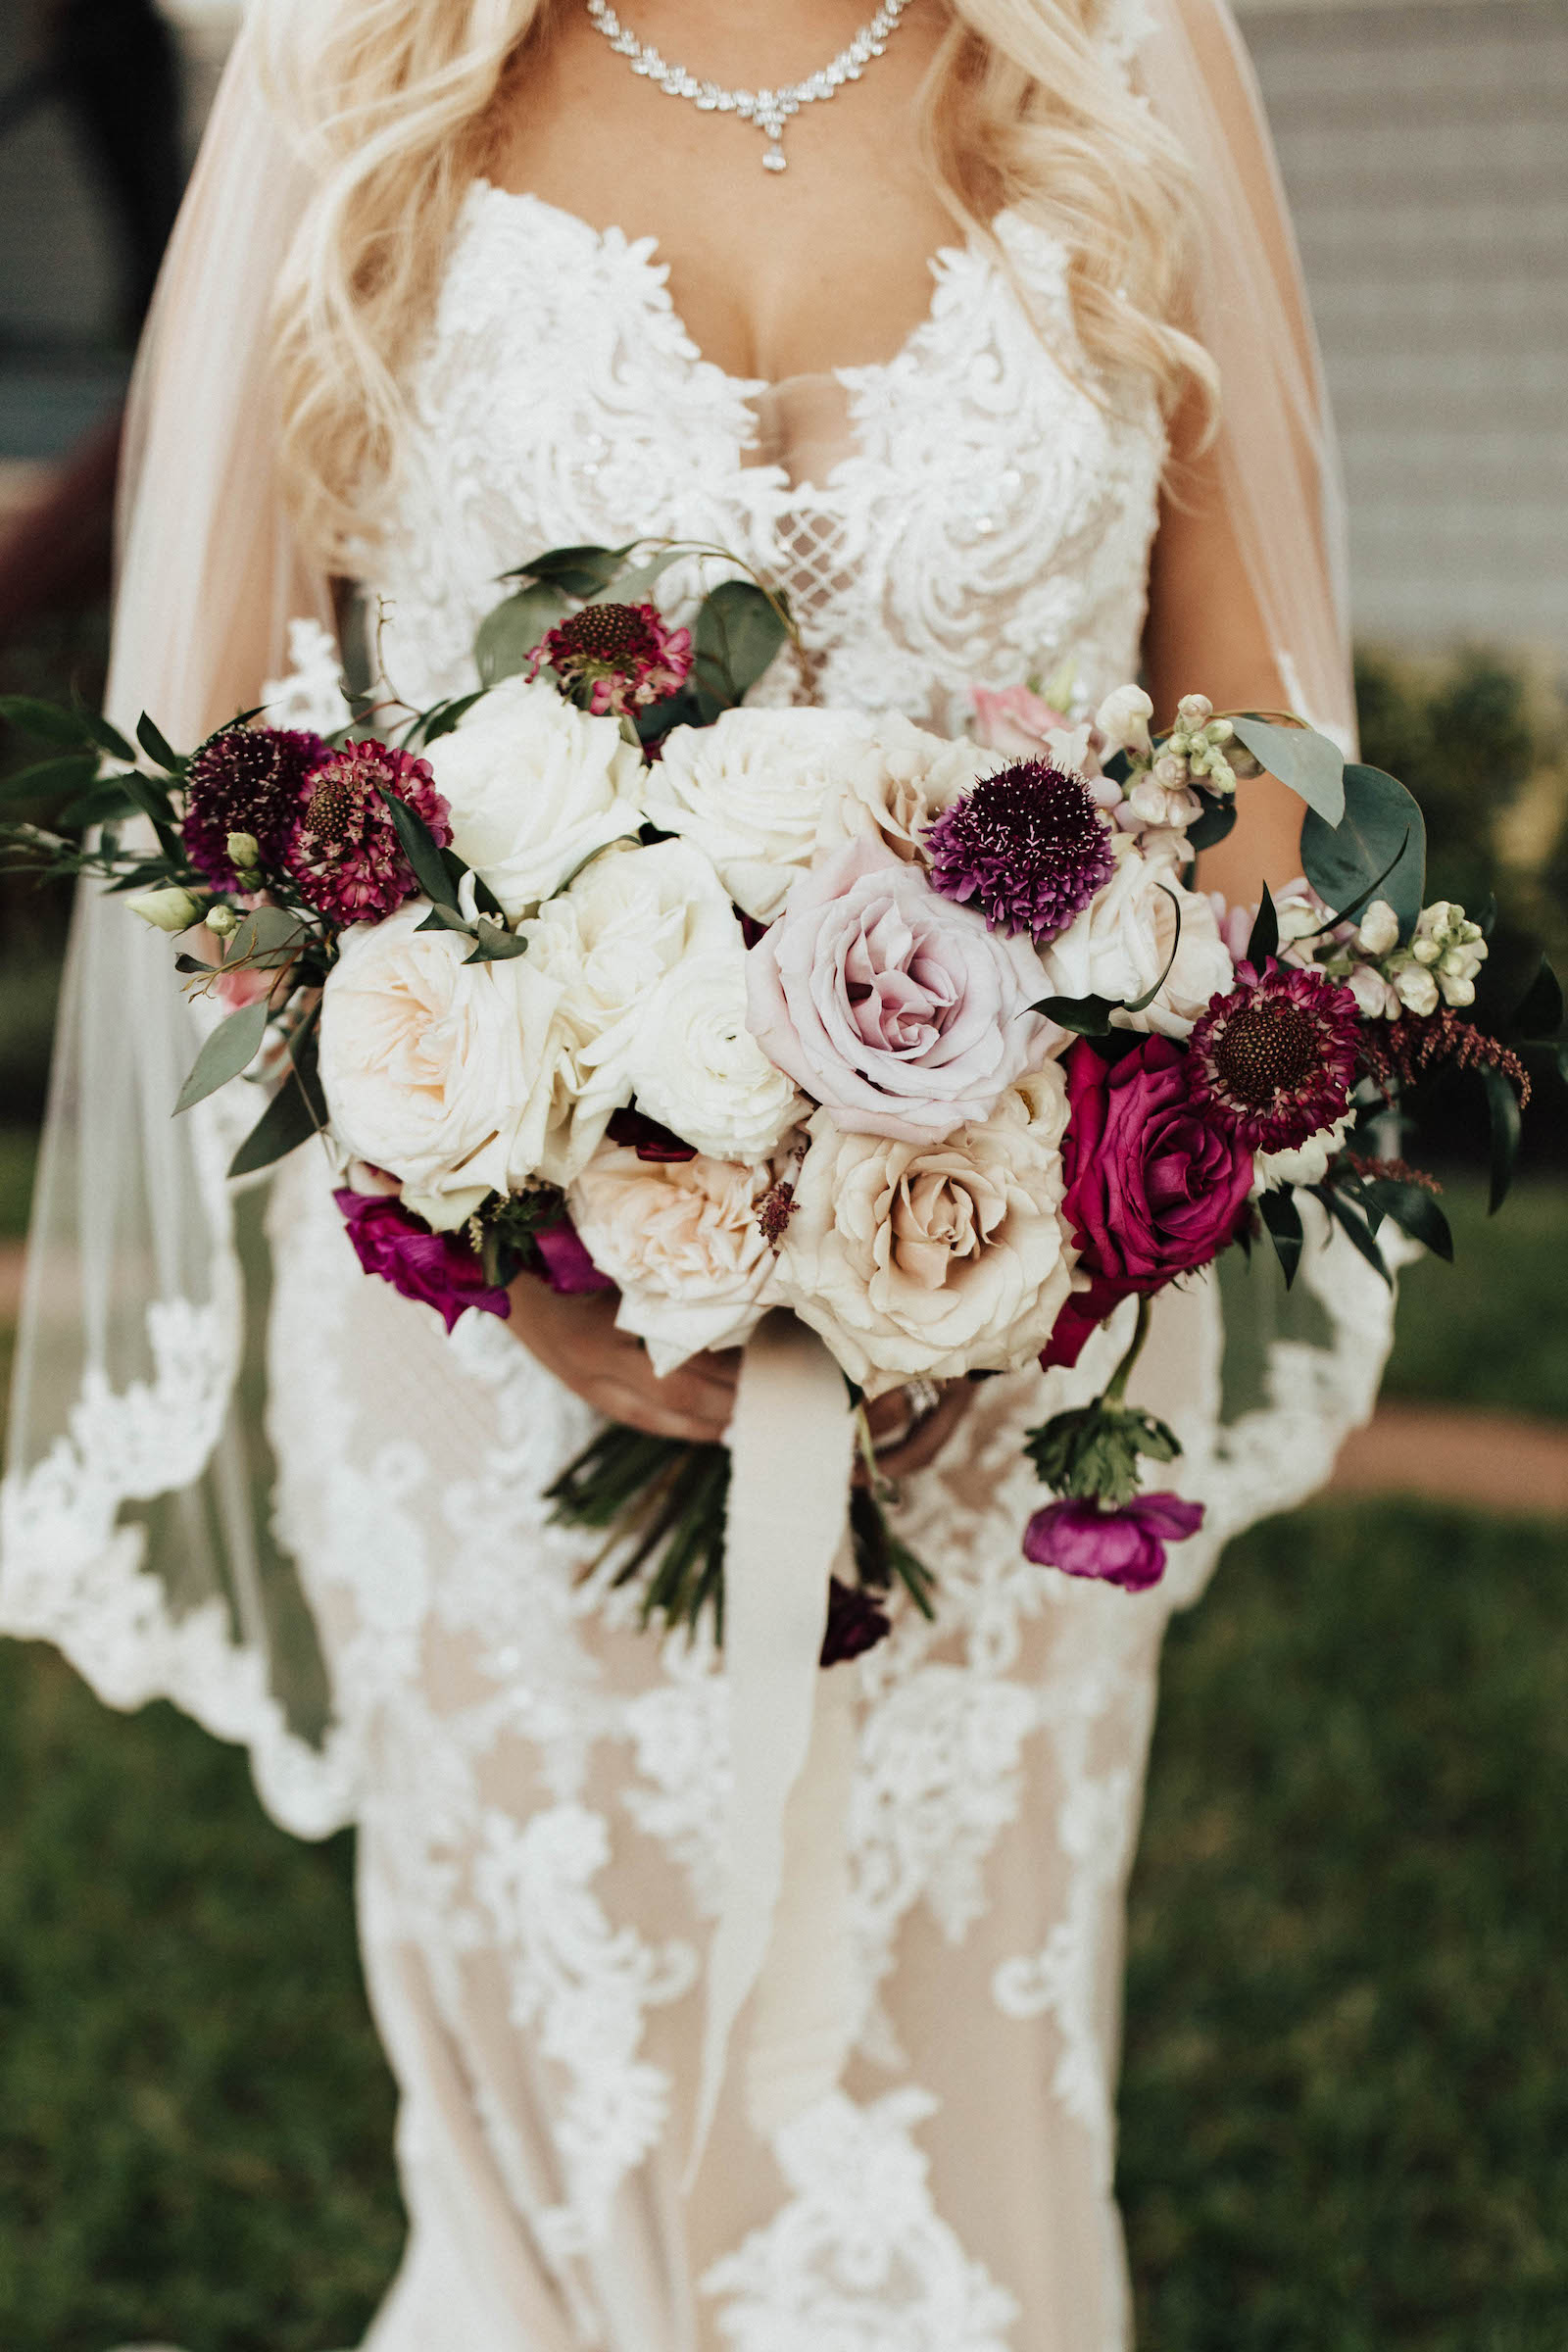 Warm Neutral Fall Wedding, Bride Wearing Lace and Illusion with Nude Lining Wedding Dress Holding Lush White Roses and Berry Colored Floral Bouquet with Greenery Beauty Wedding Portrait | Tampa Wedding Venue The Orlo